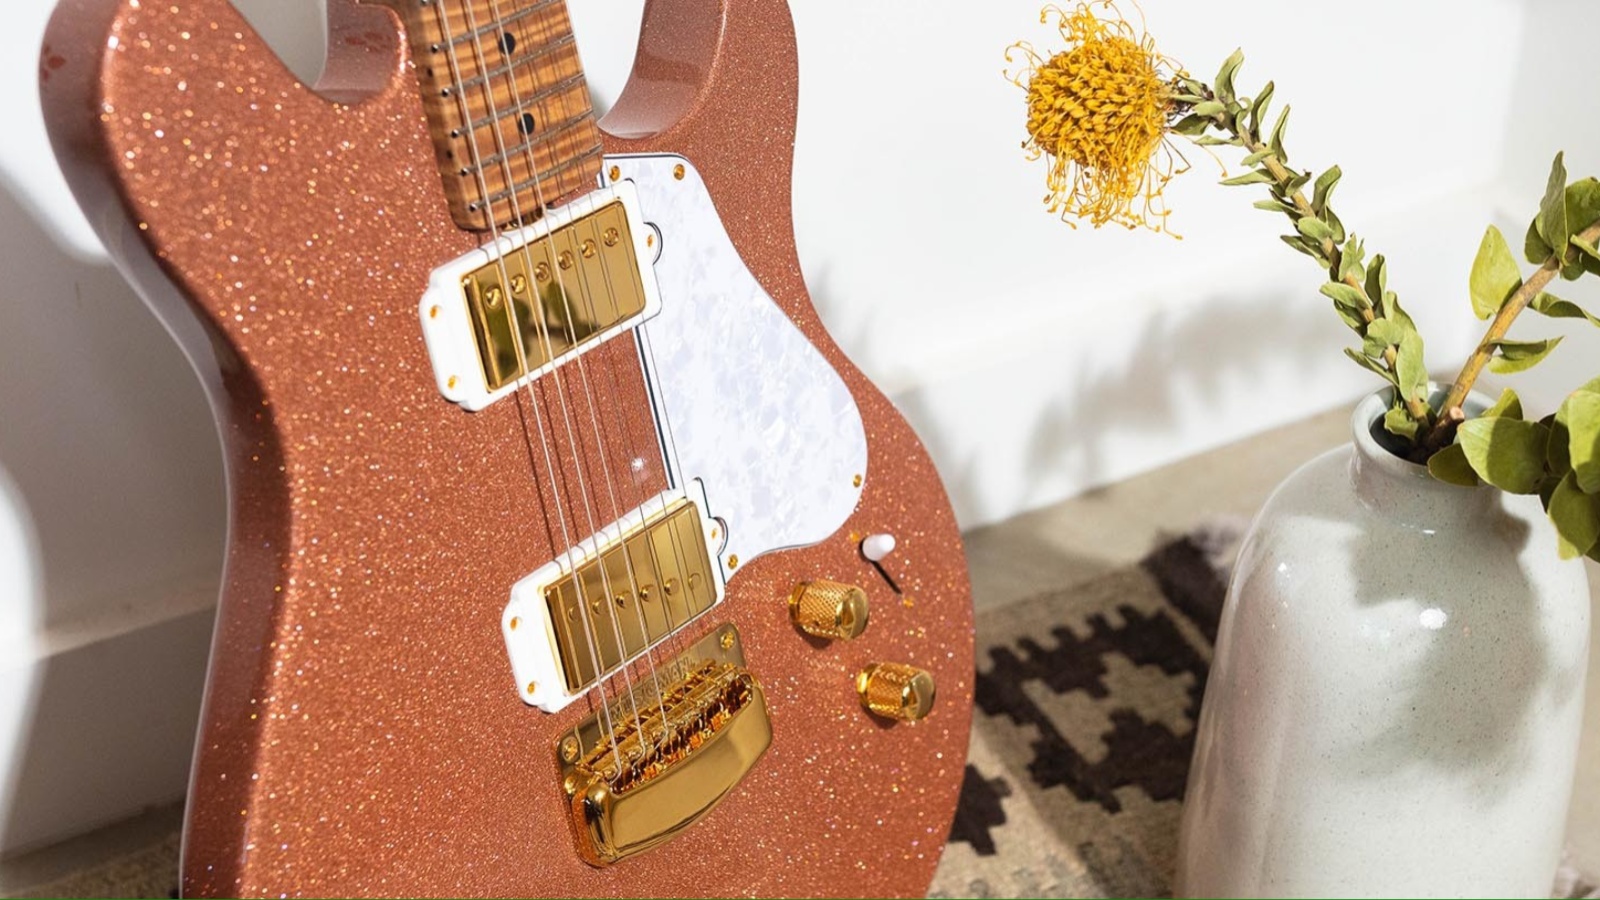 This Overlooked Signature Model Is One of the Finest Electric Guitars You Can Buy Today